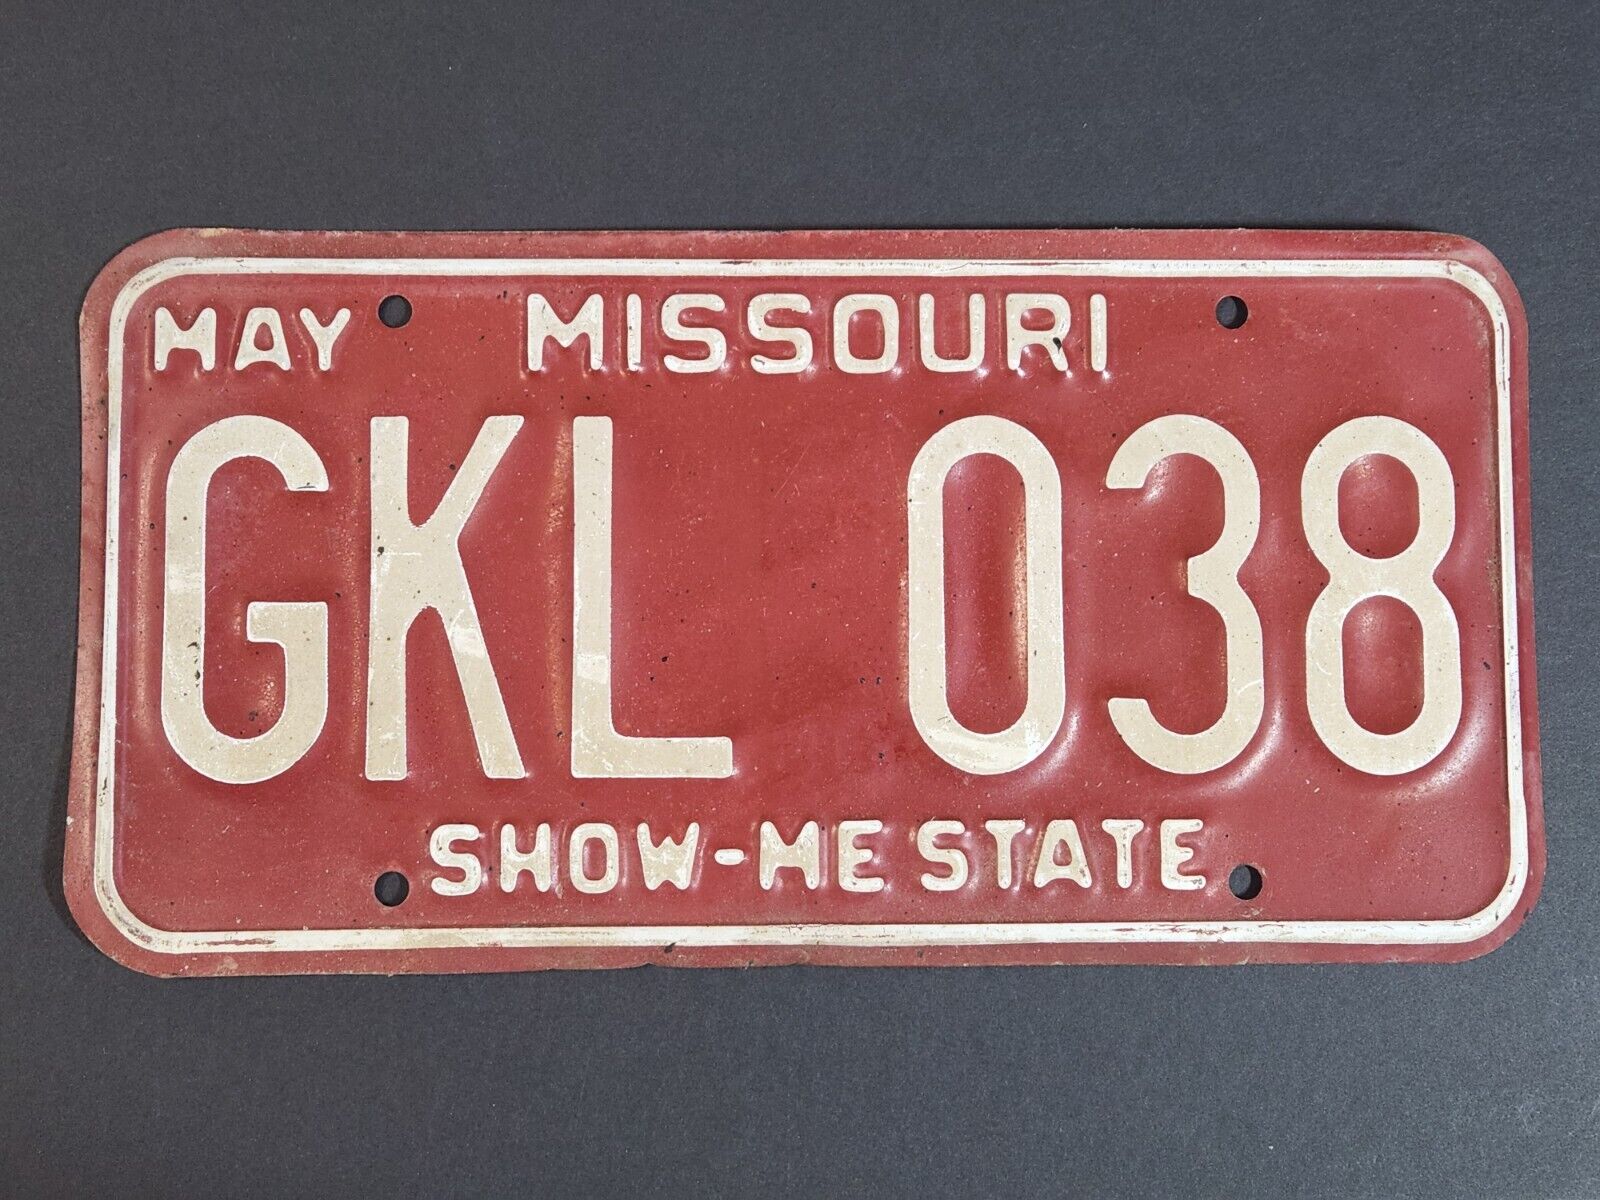 Vintage 1980 Missouri License Plate (GKL-038) Show-Me State Expired White on Red